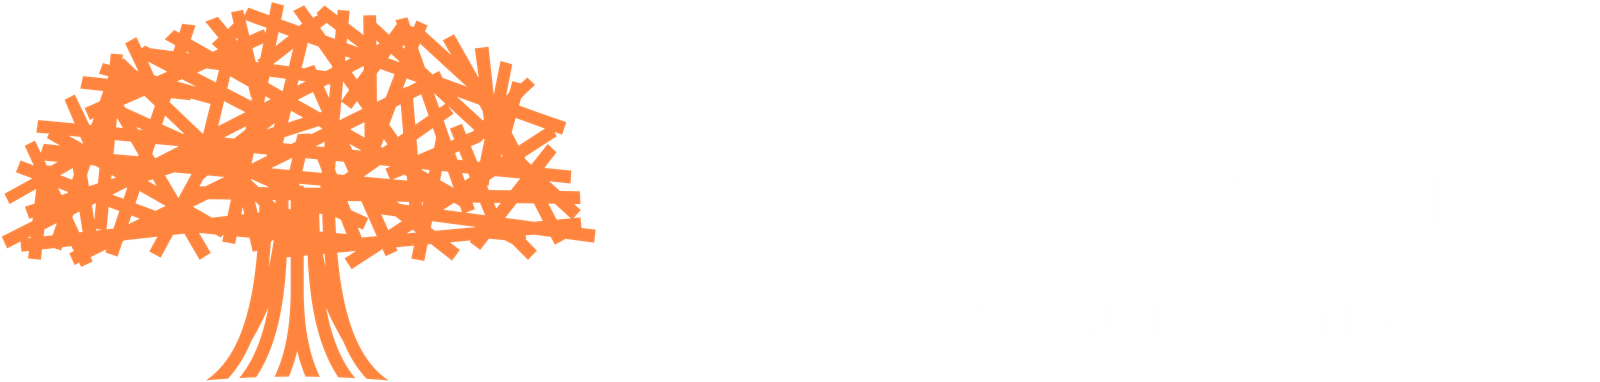 Oak & Gale Consulting